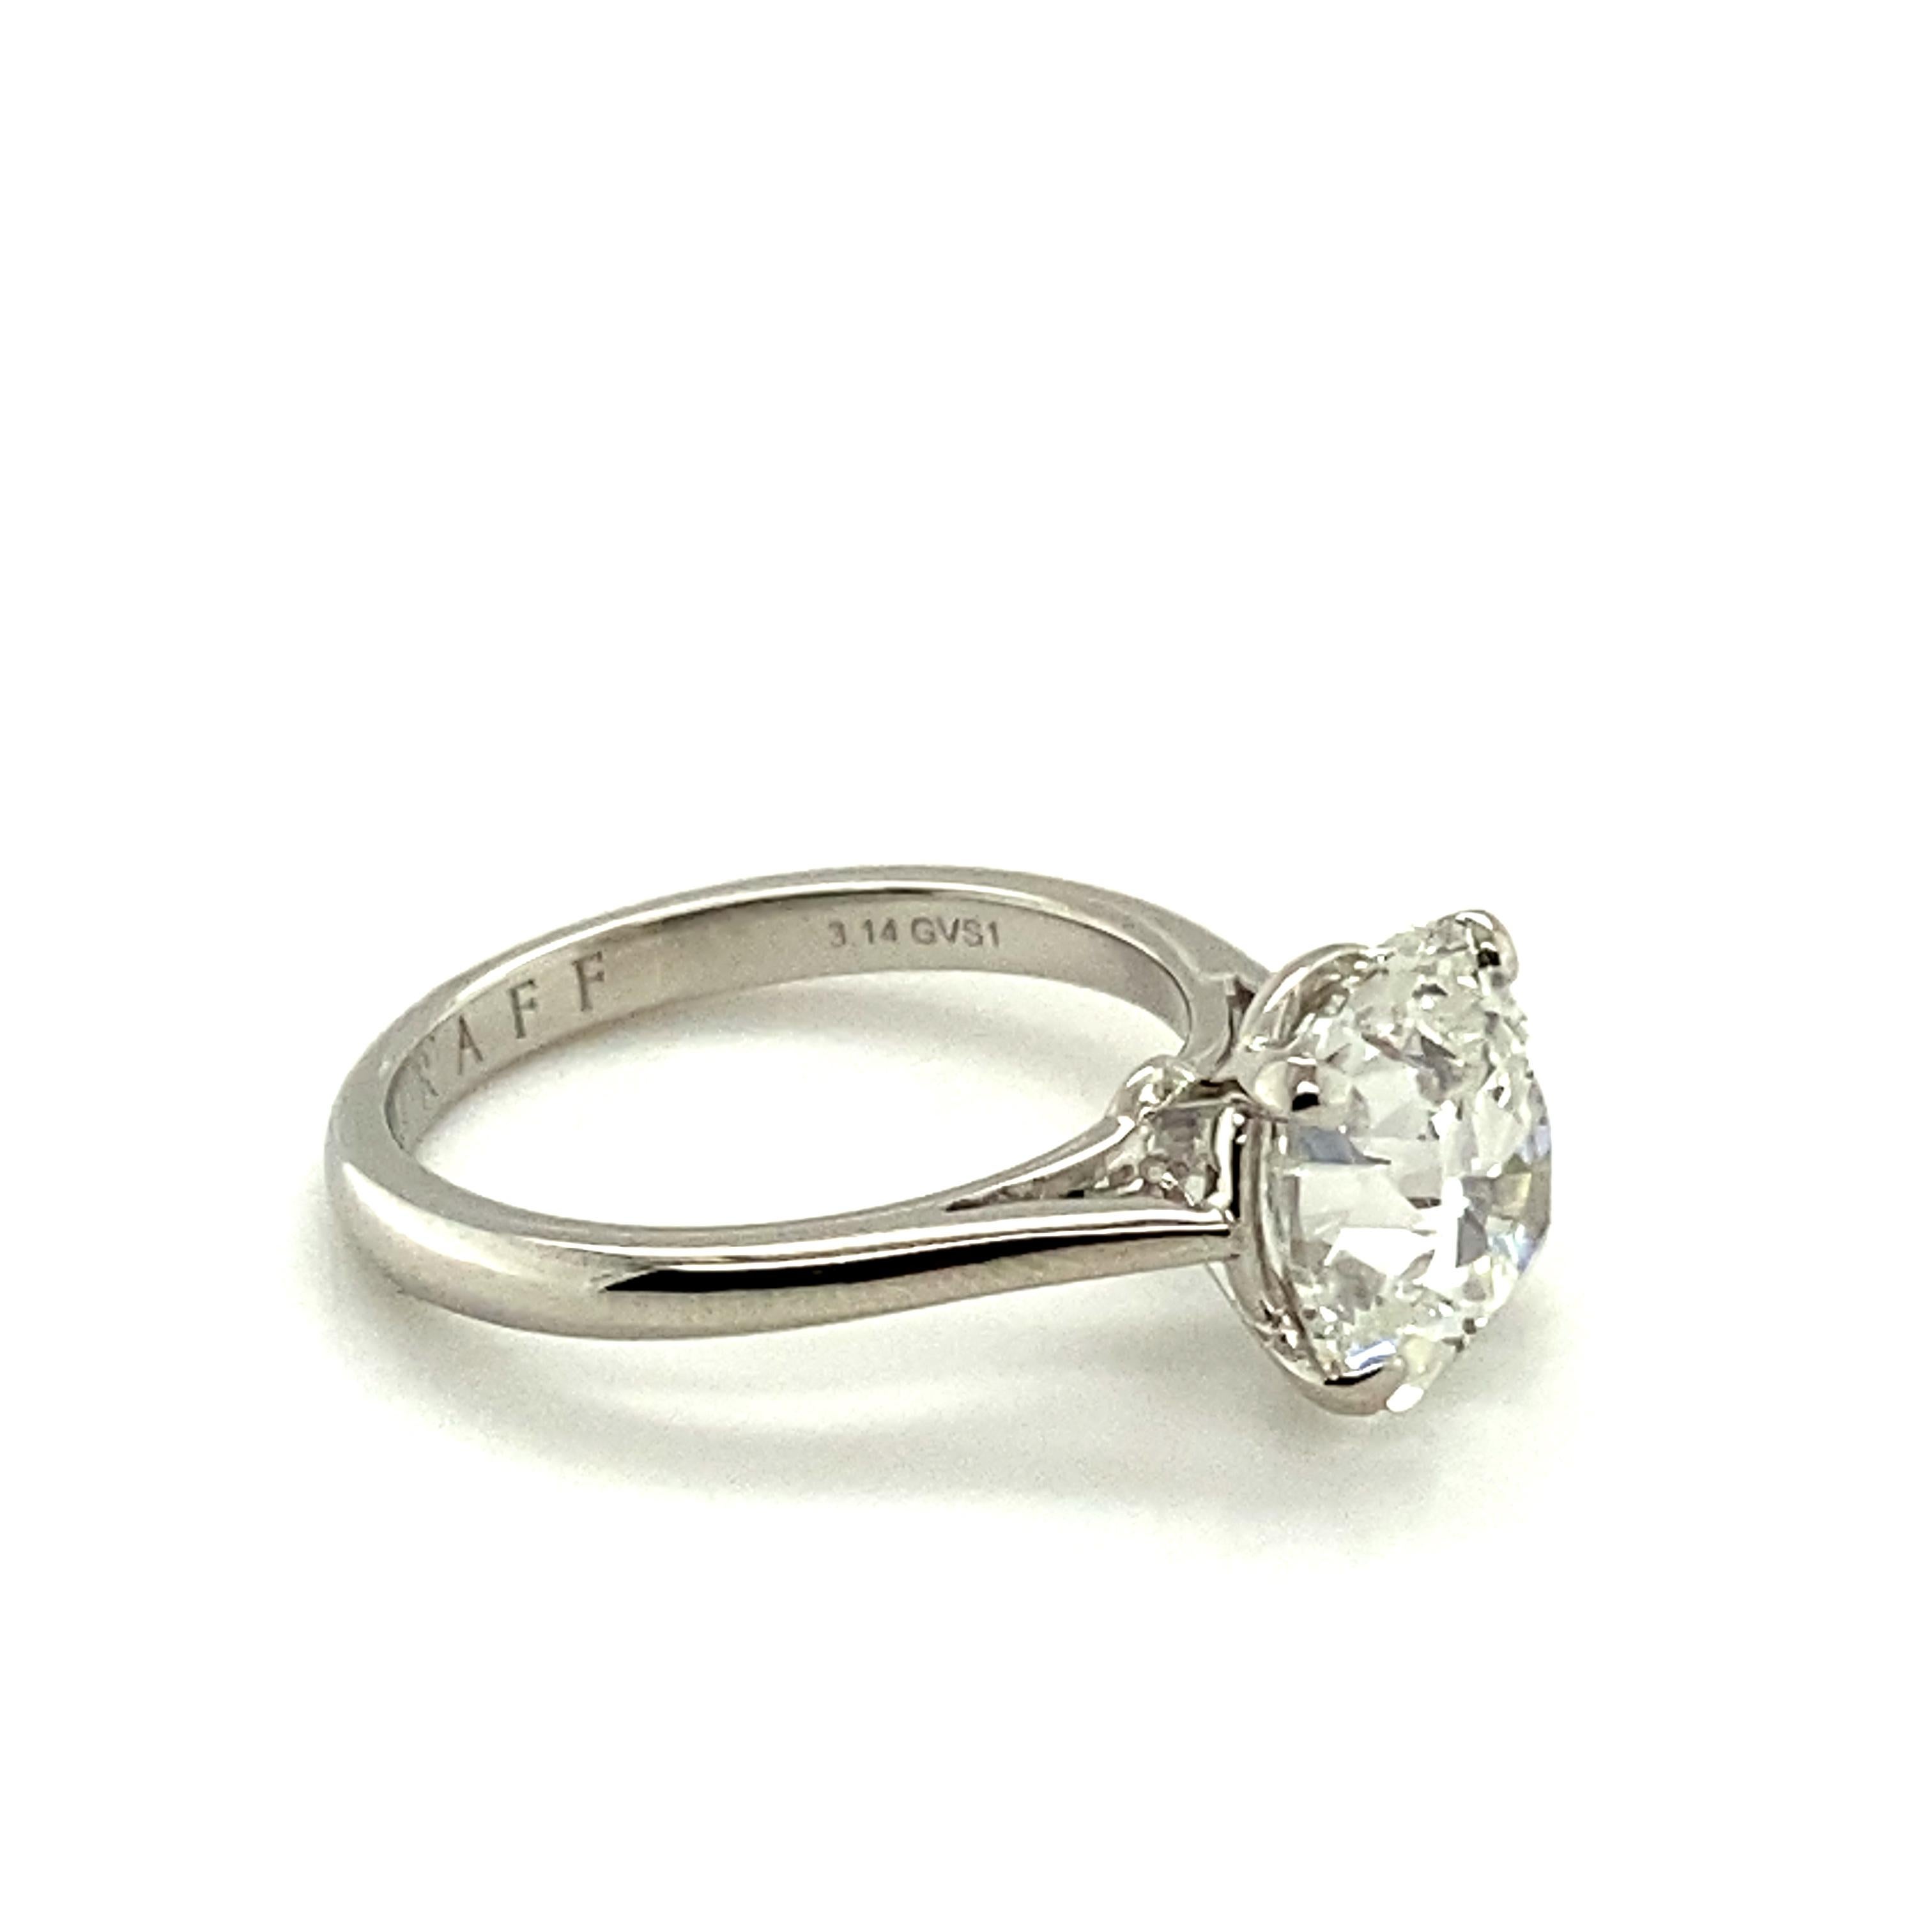 Graff Ring in 18 Karat White Gold Set with a 3.14 Ct Cushion-Shaped Diamond 4